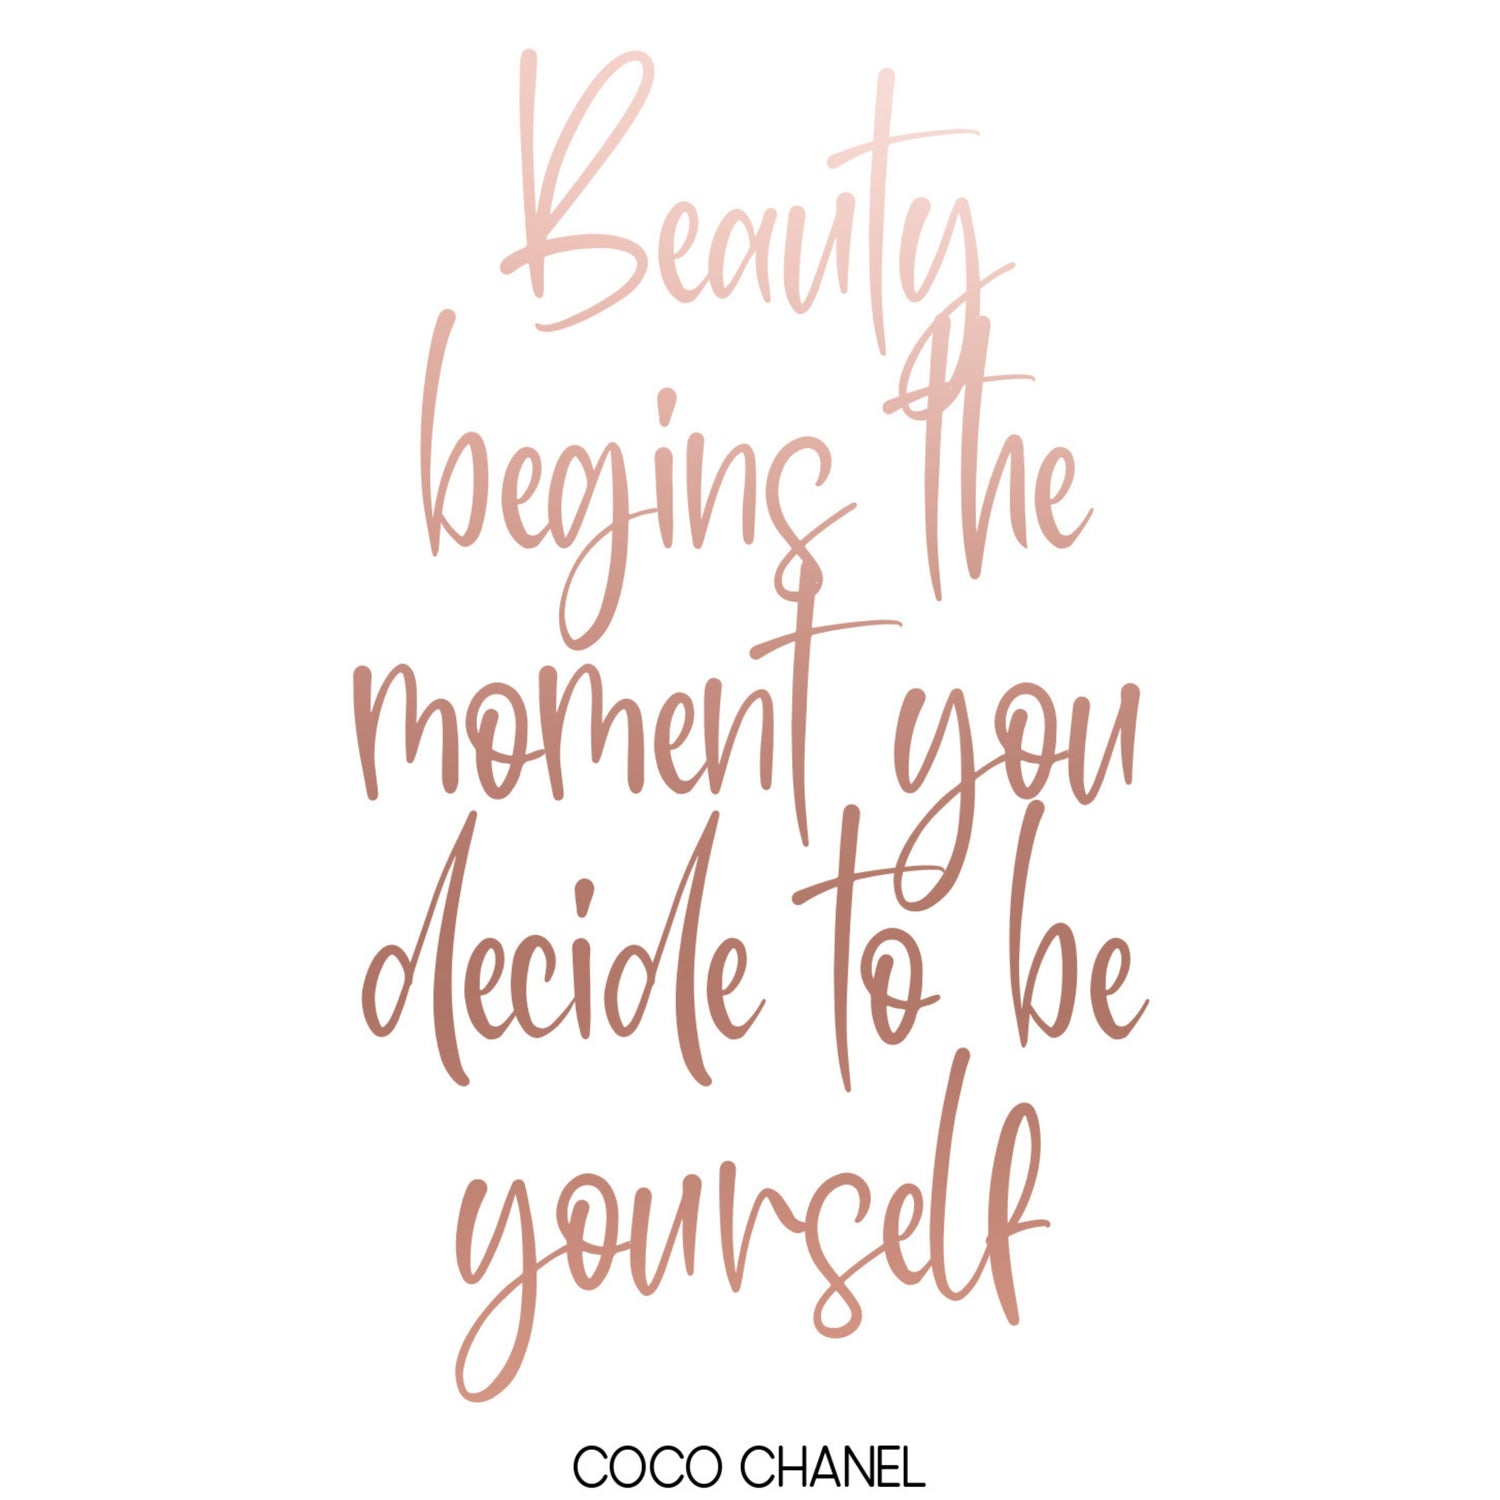 Her Campus on Twitter Beauty begins the moment you decide to be  yourself Coco Chanel wordstoliveby httptcoW3O4mPKAYQ  Twitter